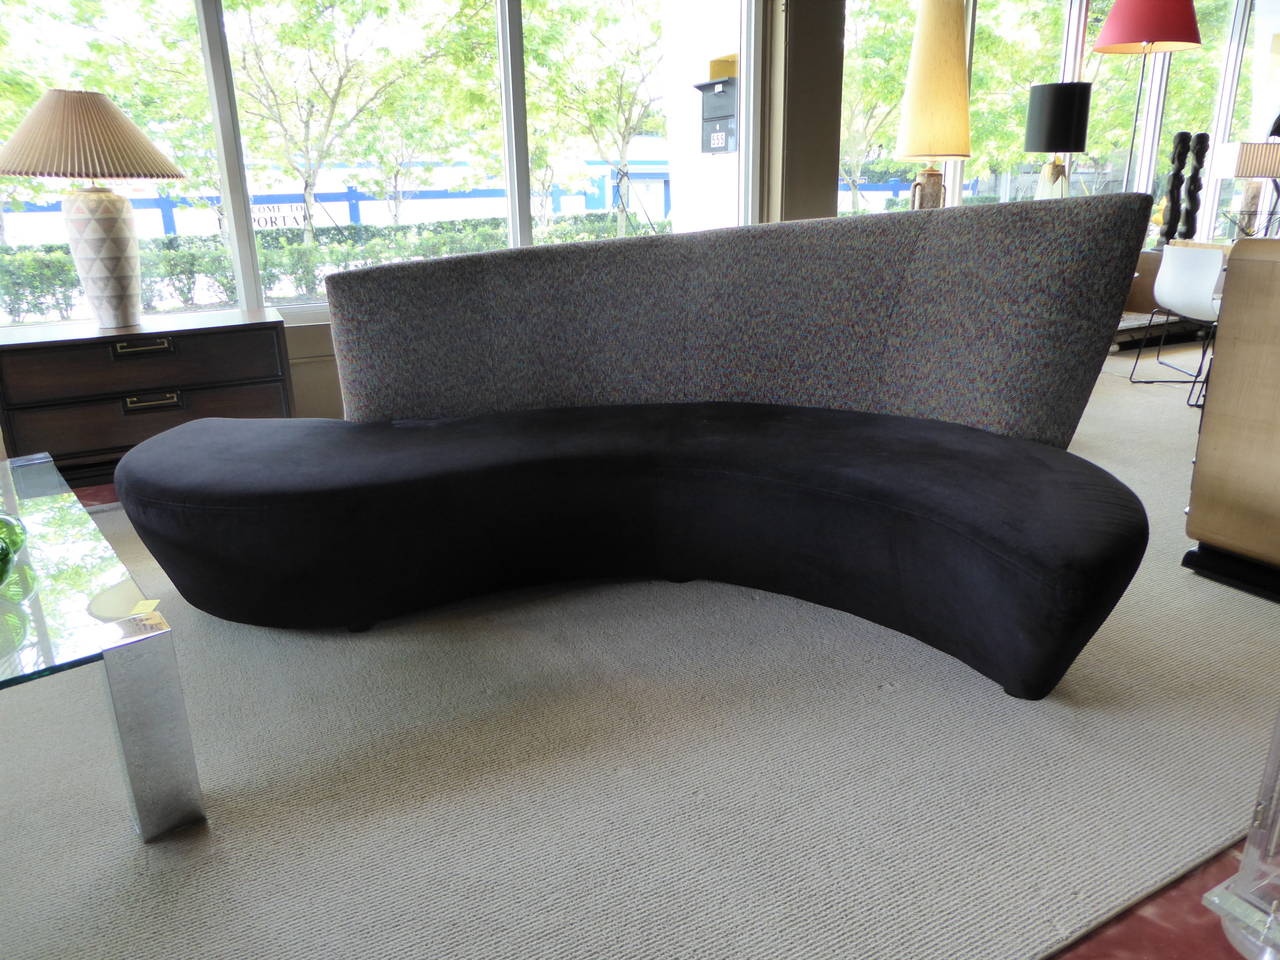 Designed by Vladimir Kagan for Preview, the Bilbao Sofa was inspired by the Frank Gehry designed Guggenheim Museum in Bilbao, Spain.  Here in original black ultra suede seat and multi color chenille micro weave back, excellent condition..  Exciting,